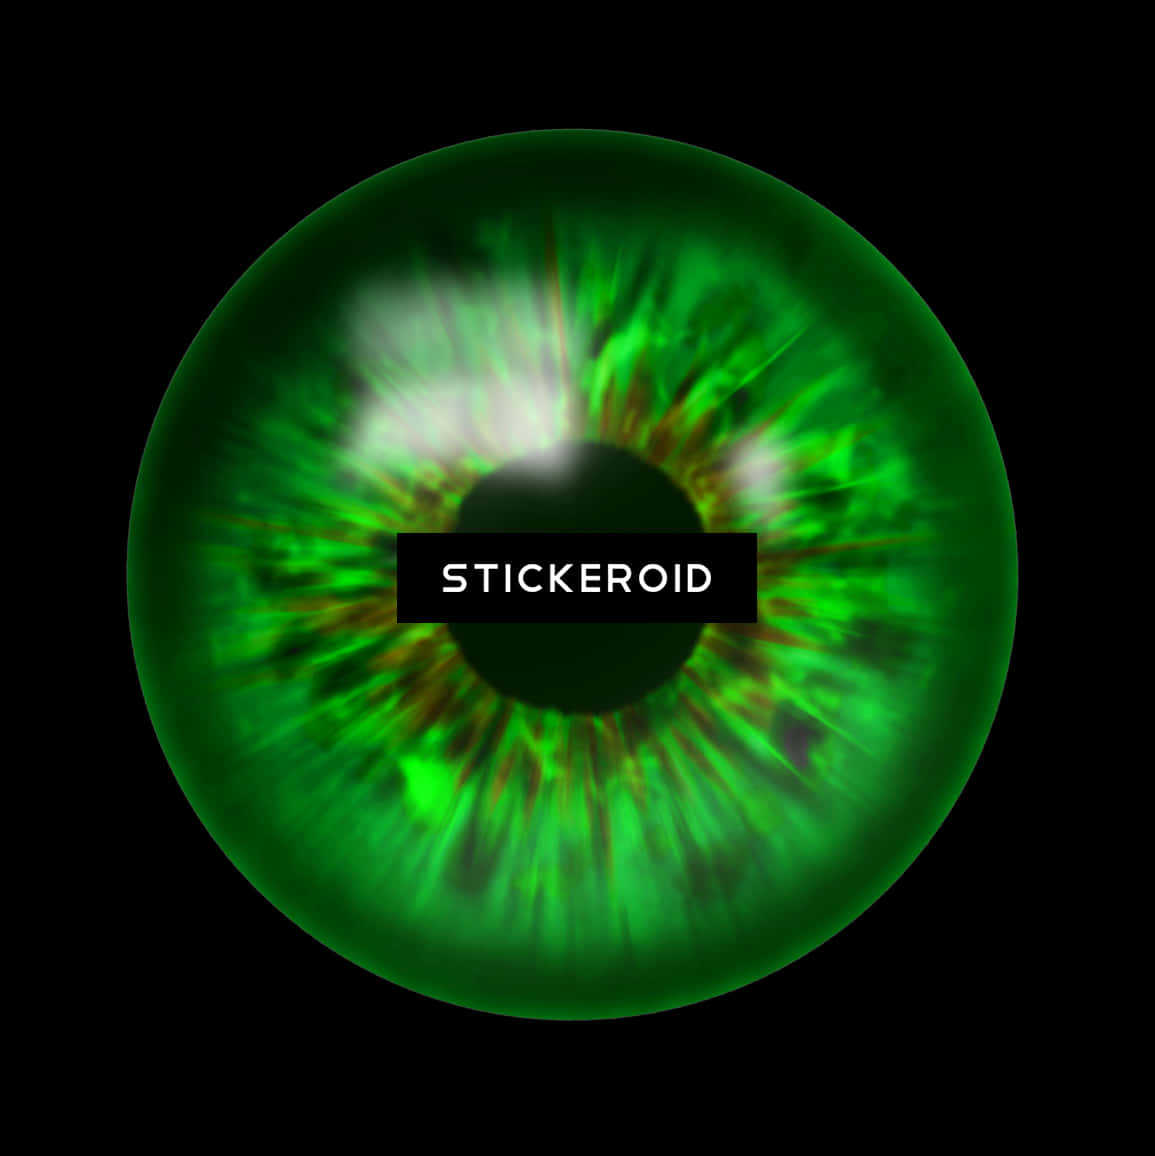 A Green Eyeball With Black Circle And White Text